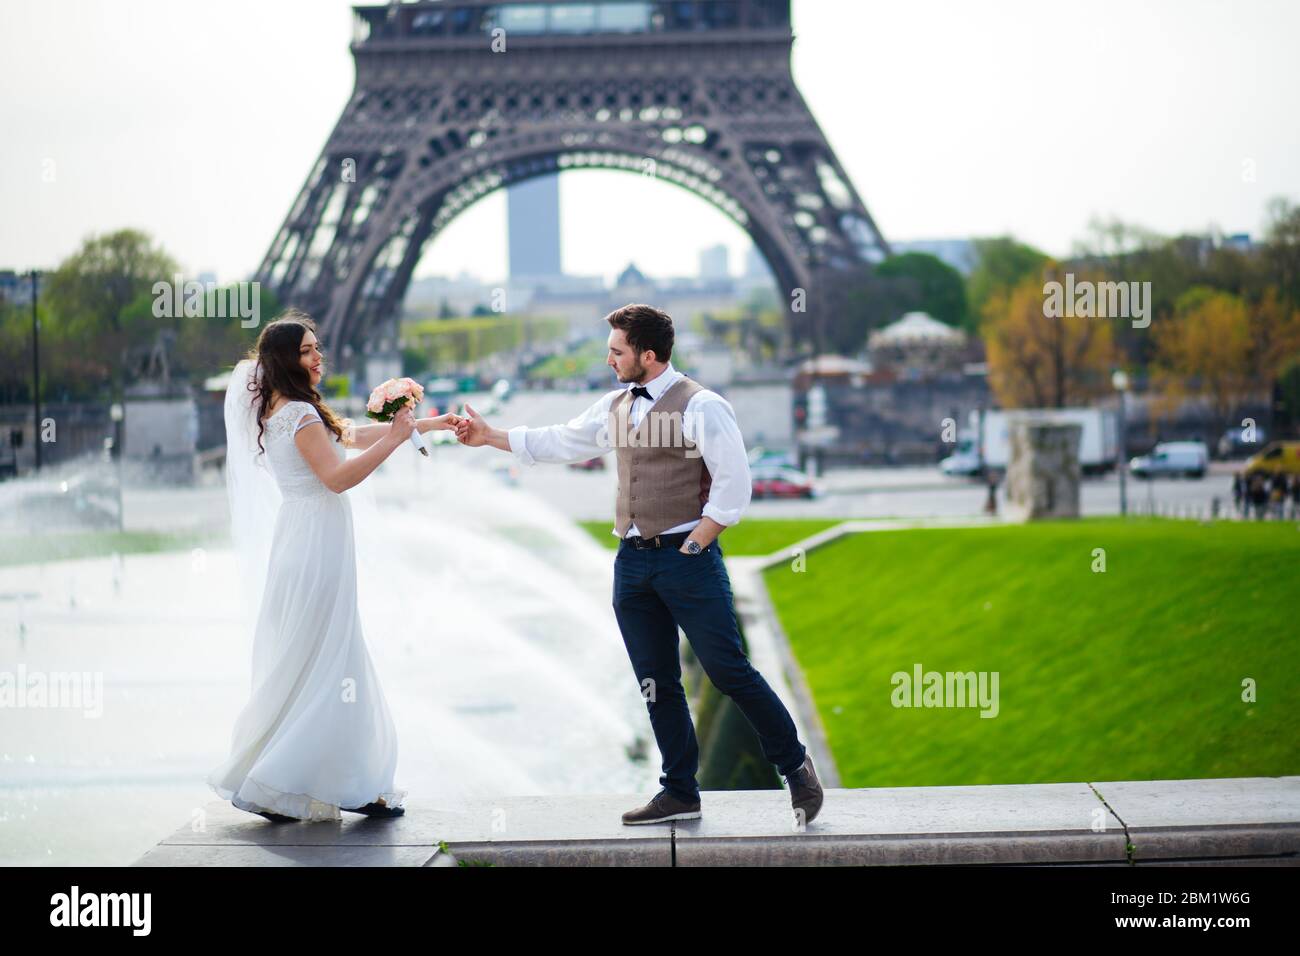 wedding couple. The bride in a beautiful wedding dress, the bride in a stylish tuxedo, Paris France. Stock Photo